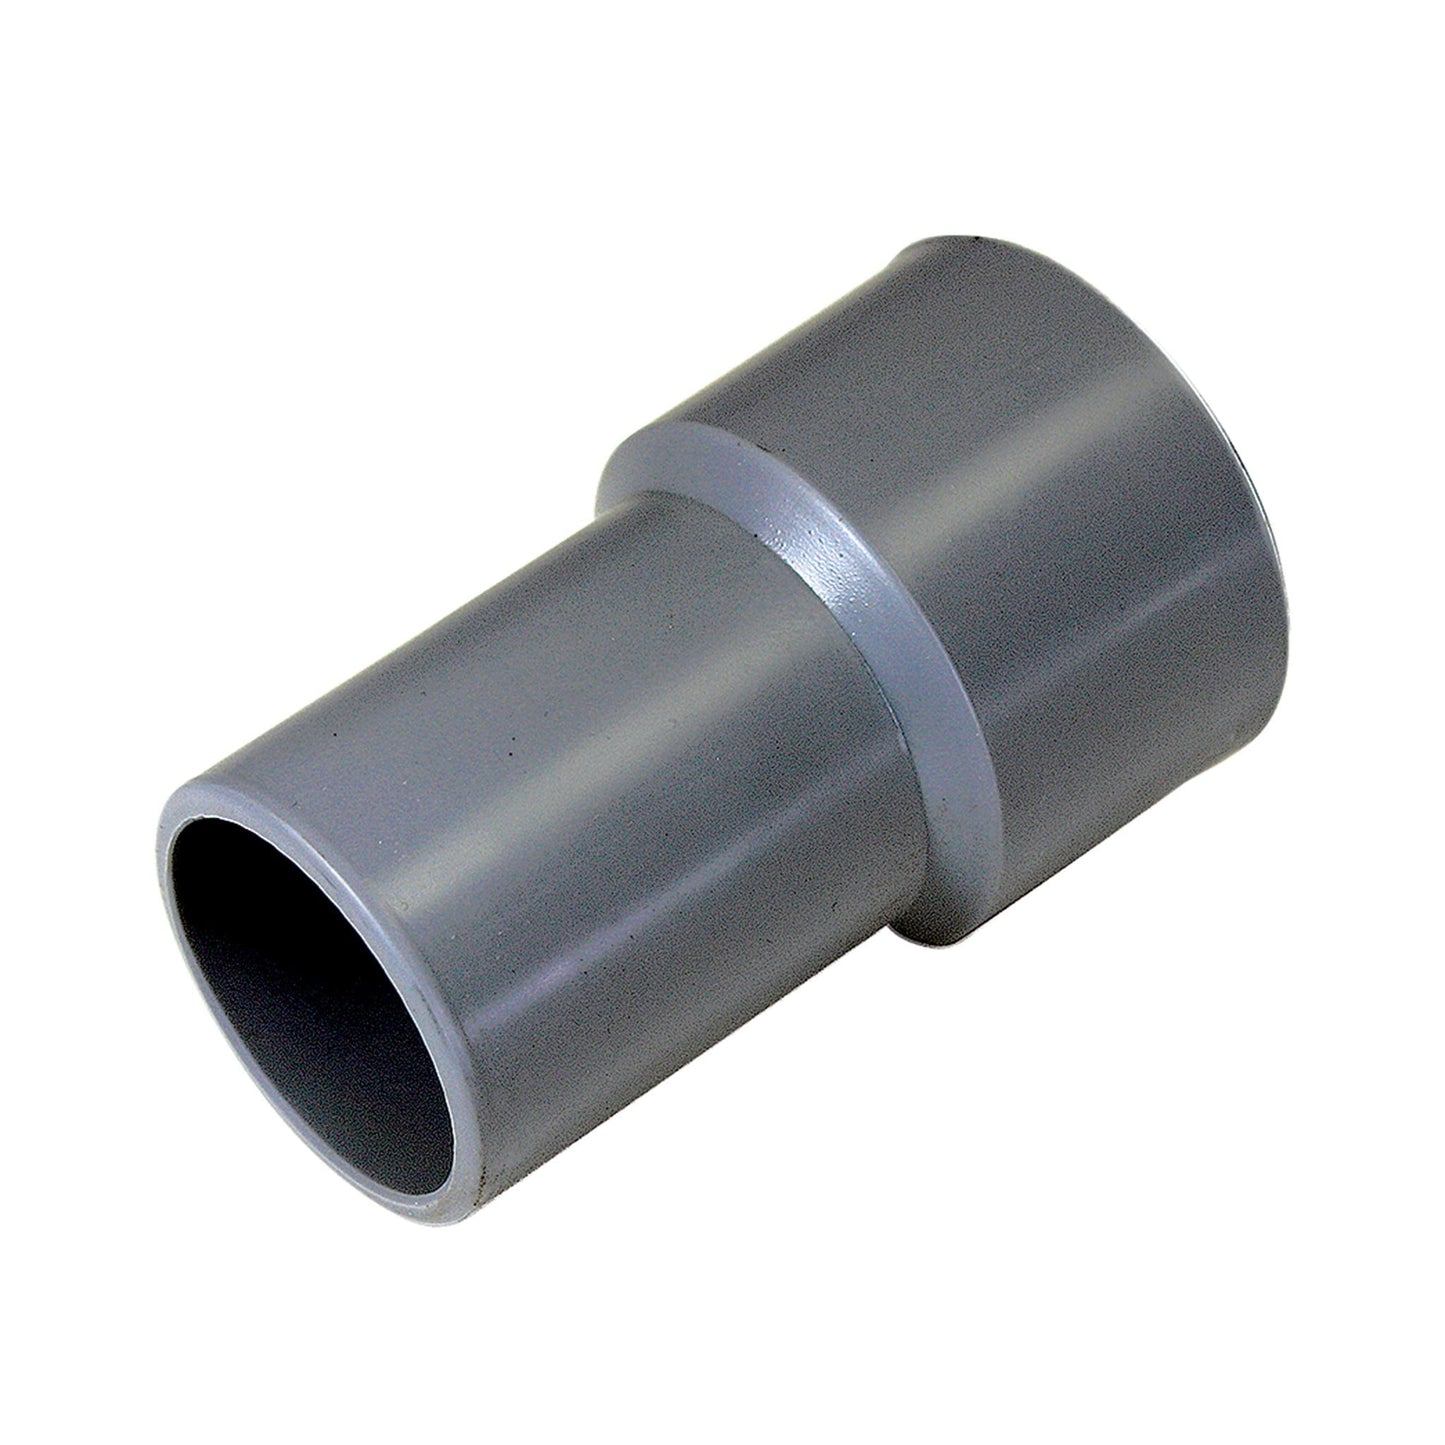 1-1/2" to 1-1/2" (N621)